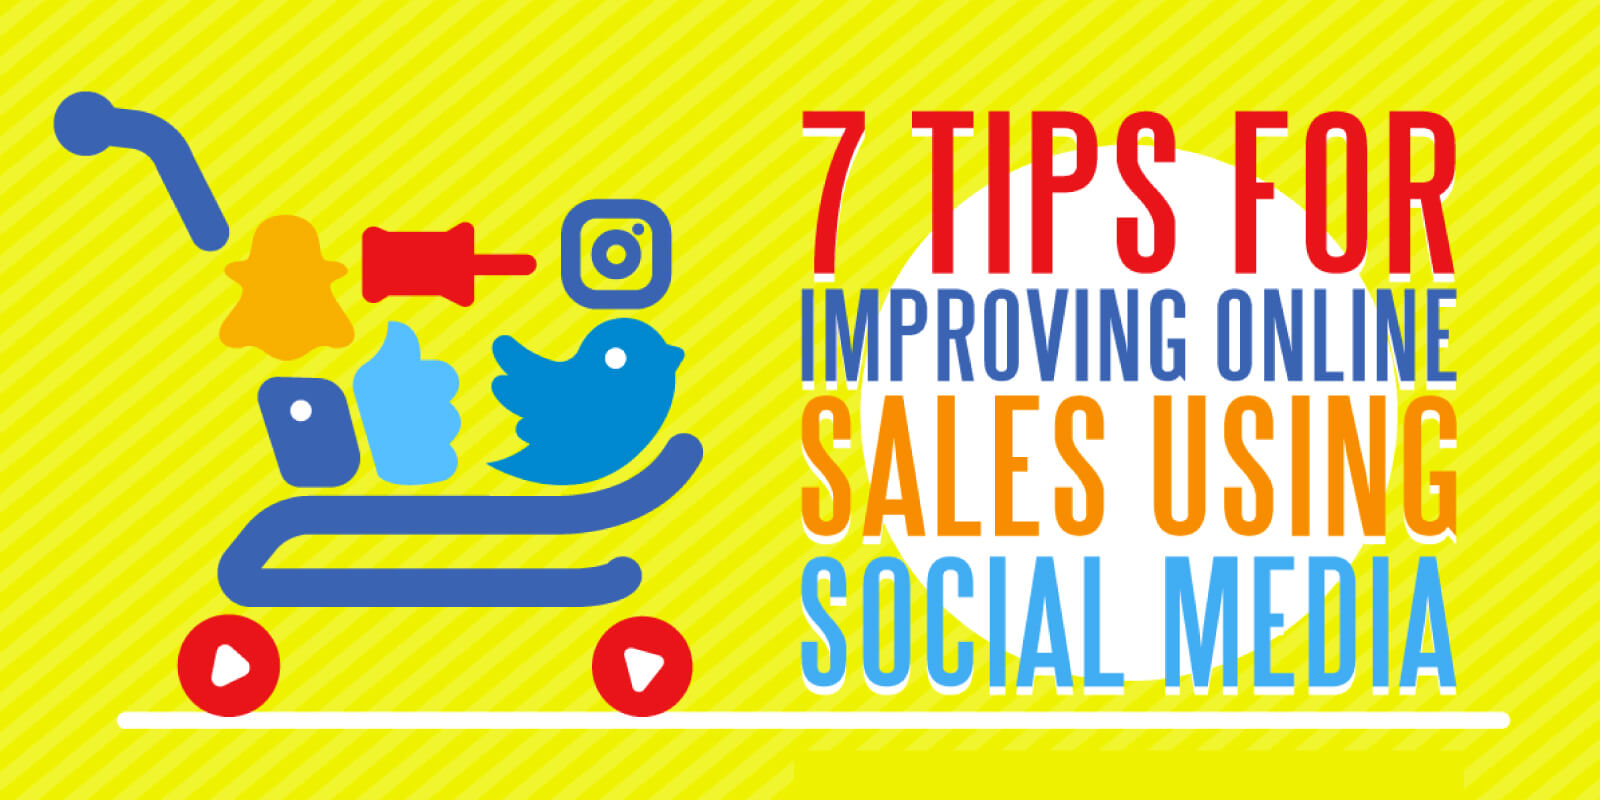 You are currently viewing 7 Tips for Improving Online Sales Using Social Media